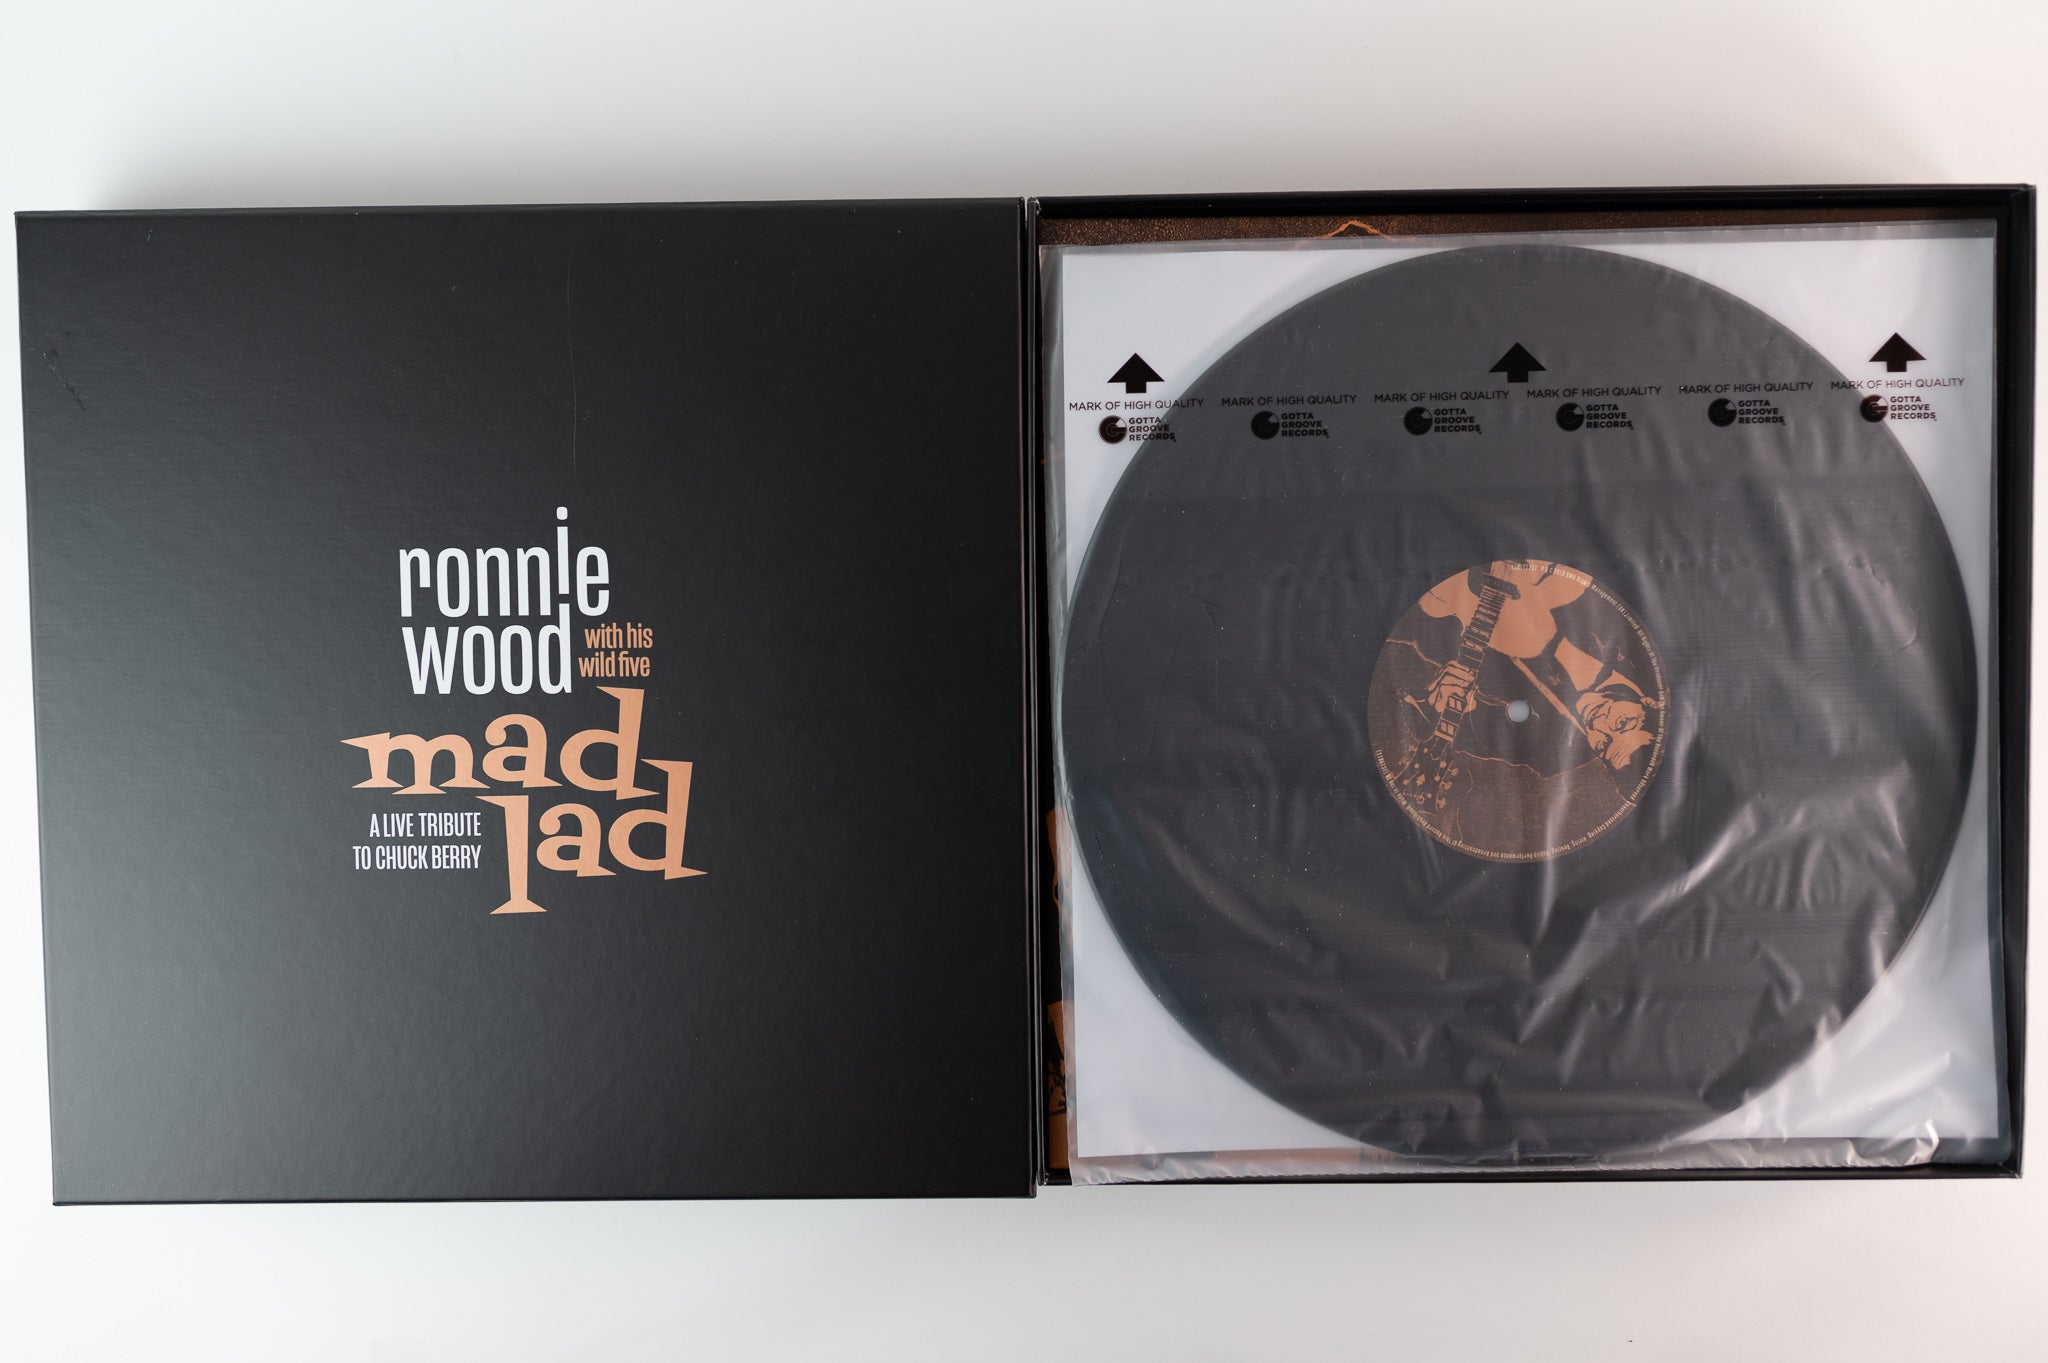 Ronnie Wood With His Wild Five - Mad Lad A Live Tribute To Chuck Berry on BMG - Box Set